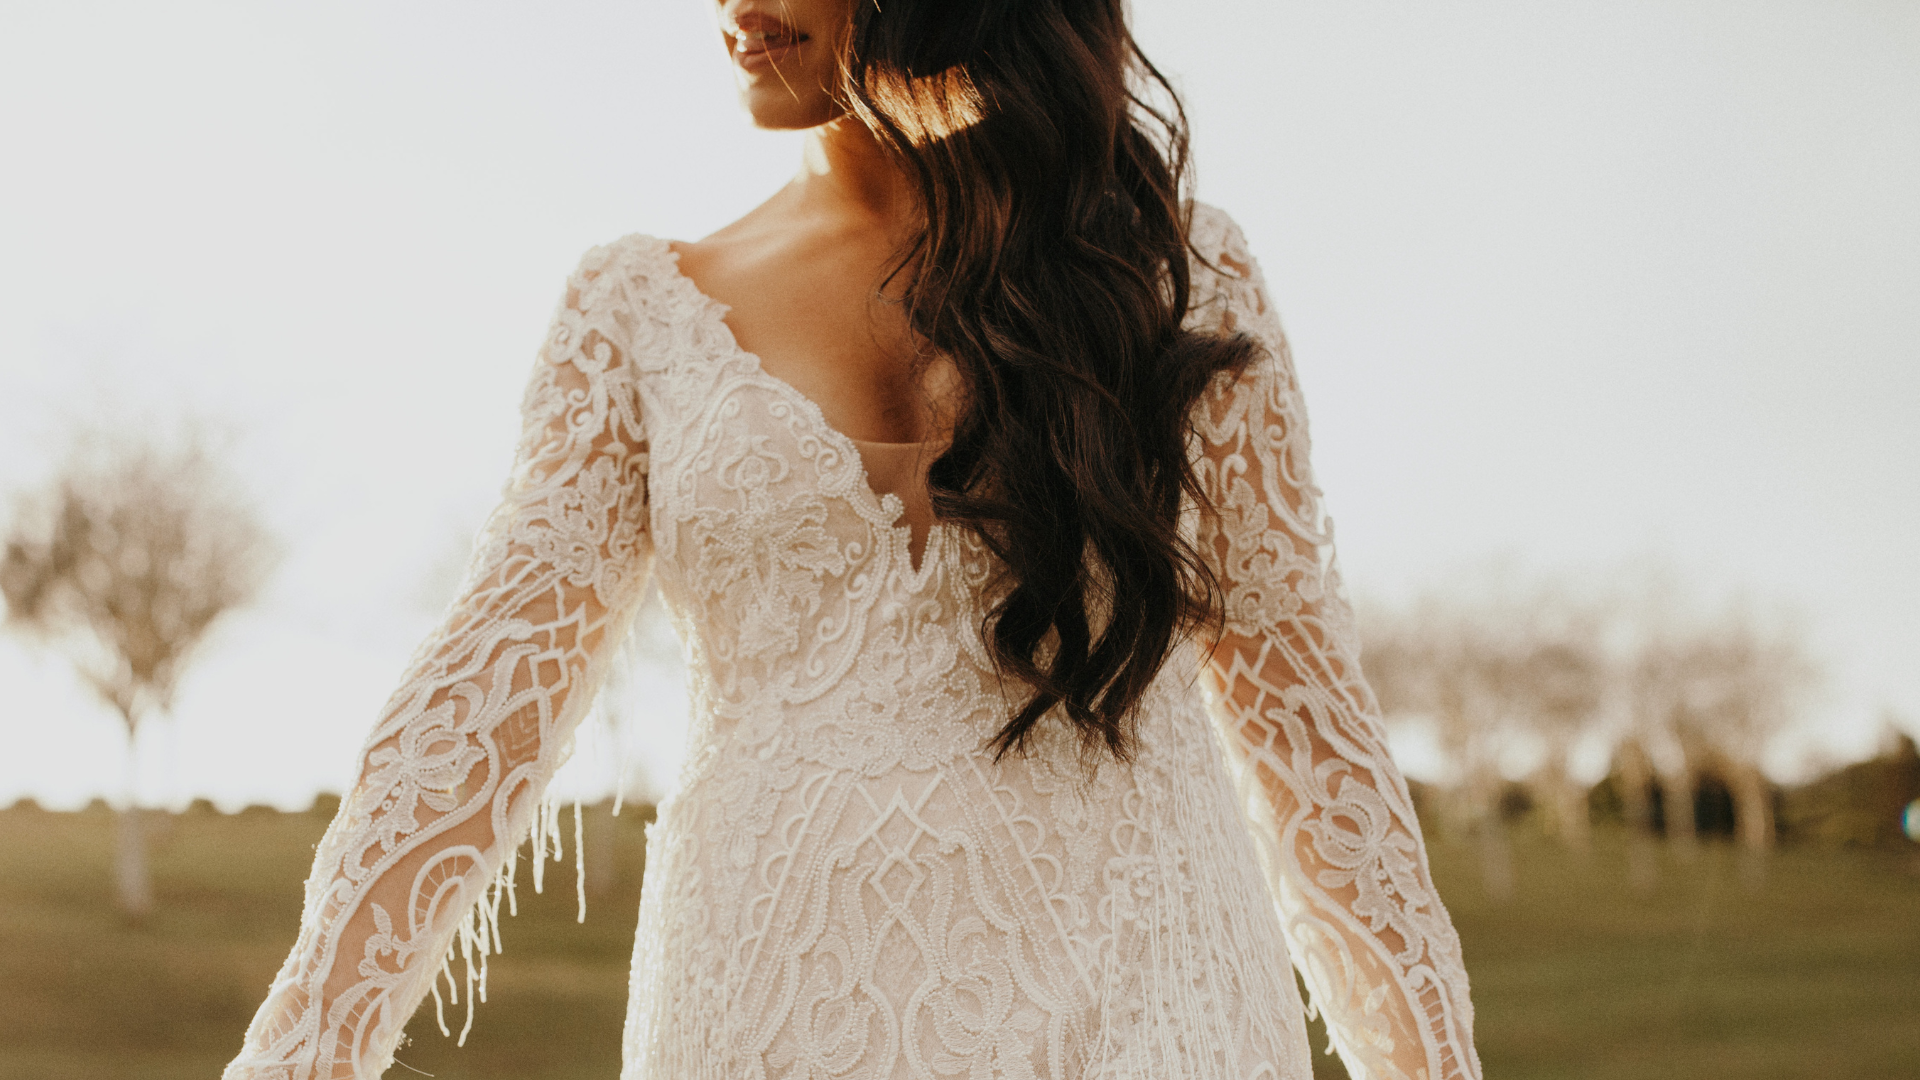 5 Things You MUST Have If You're Planning to DIY Your Wedding Hair